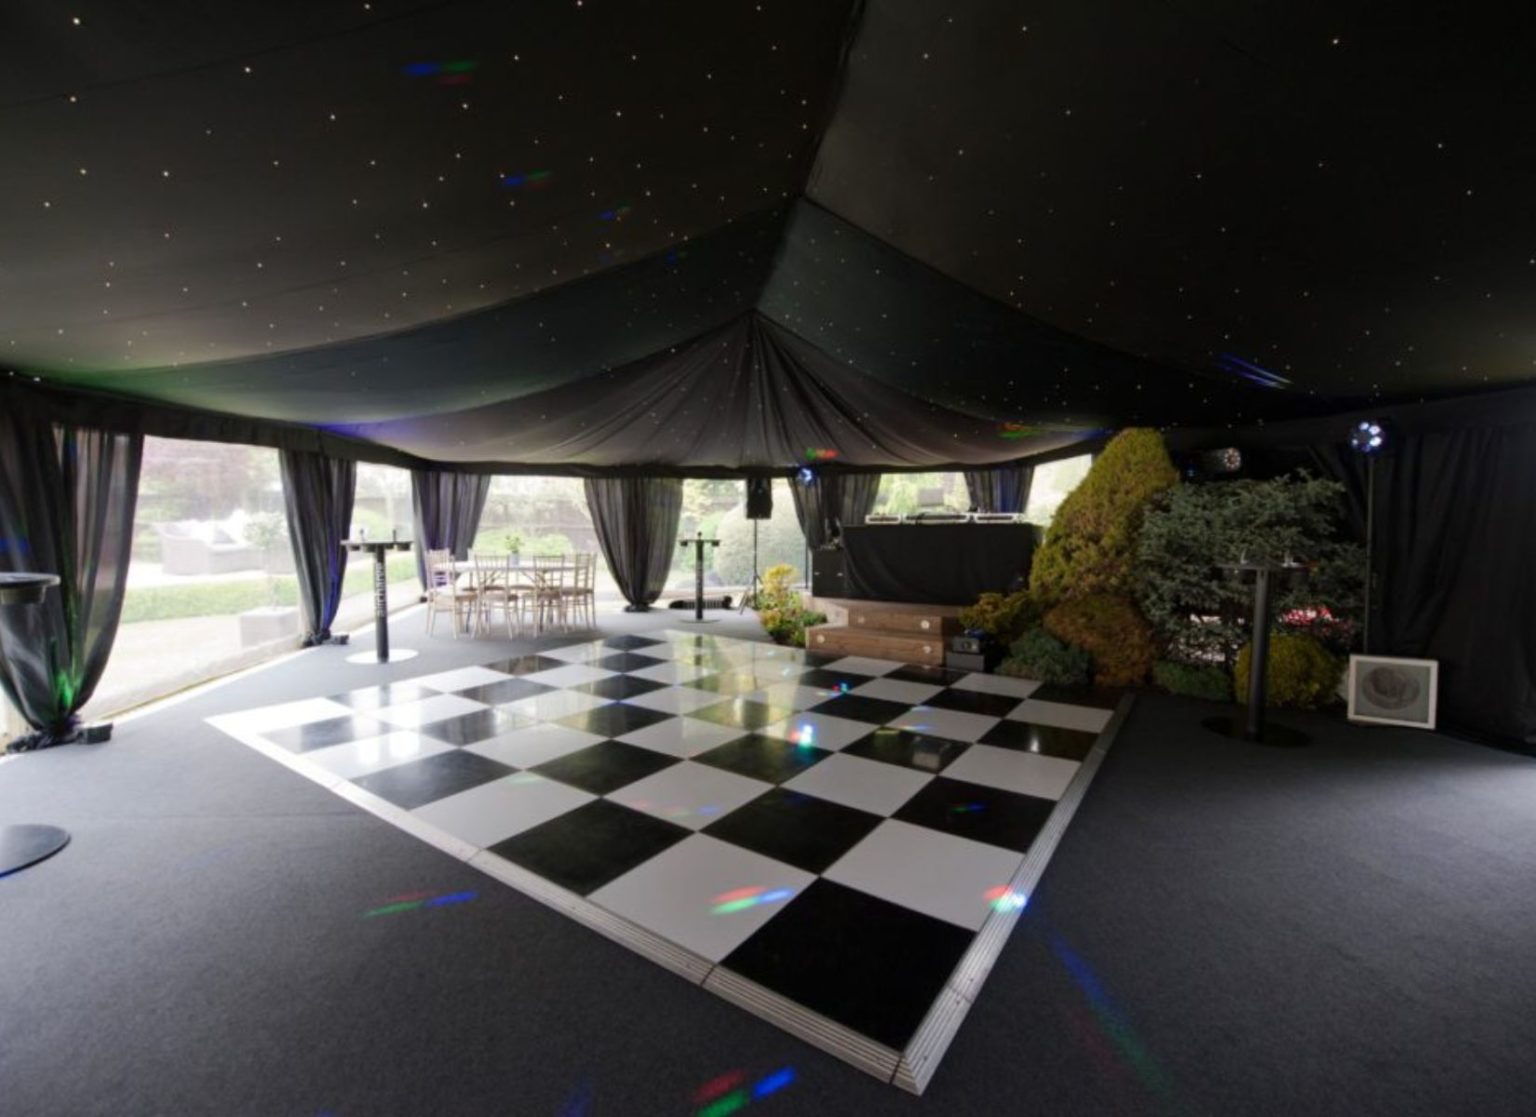 Black & White Dance Floor inside Party Marquee